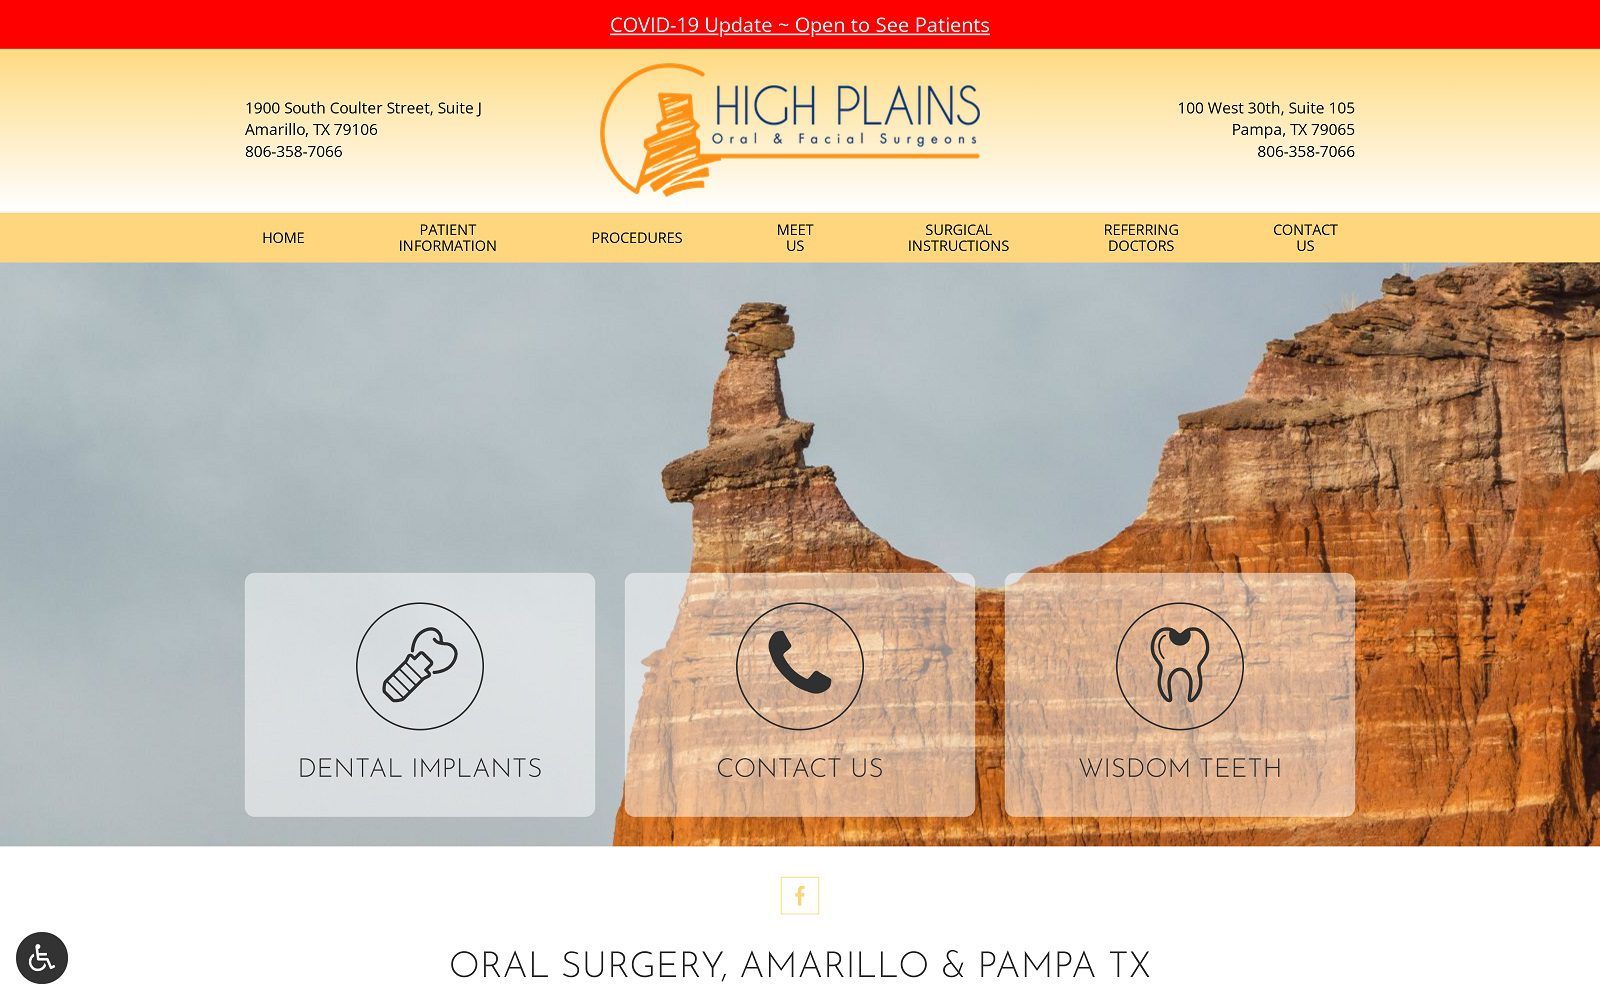 The screenshot of high plains oral and facial surgeons website